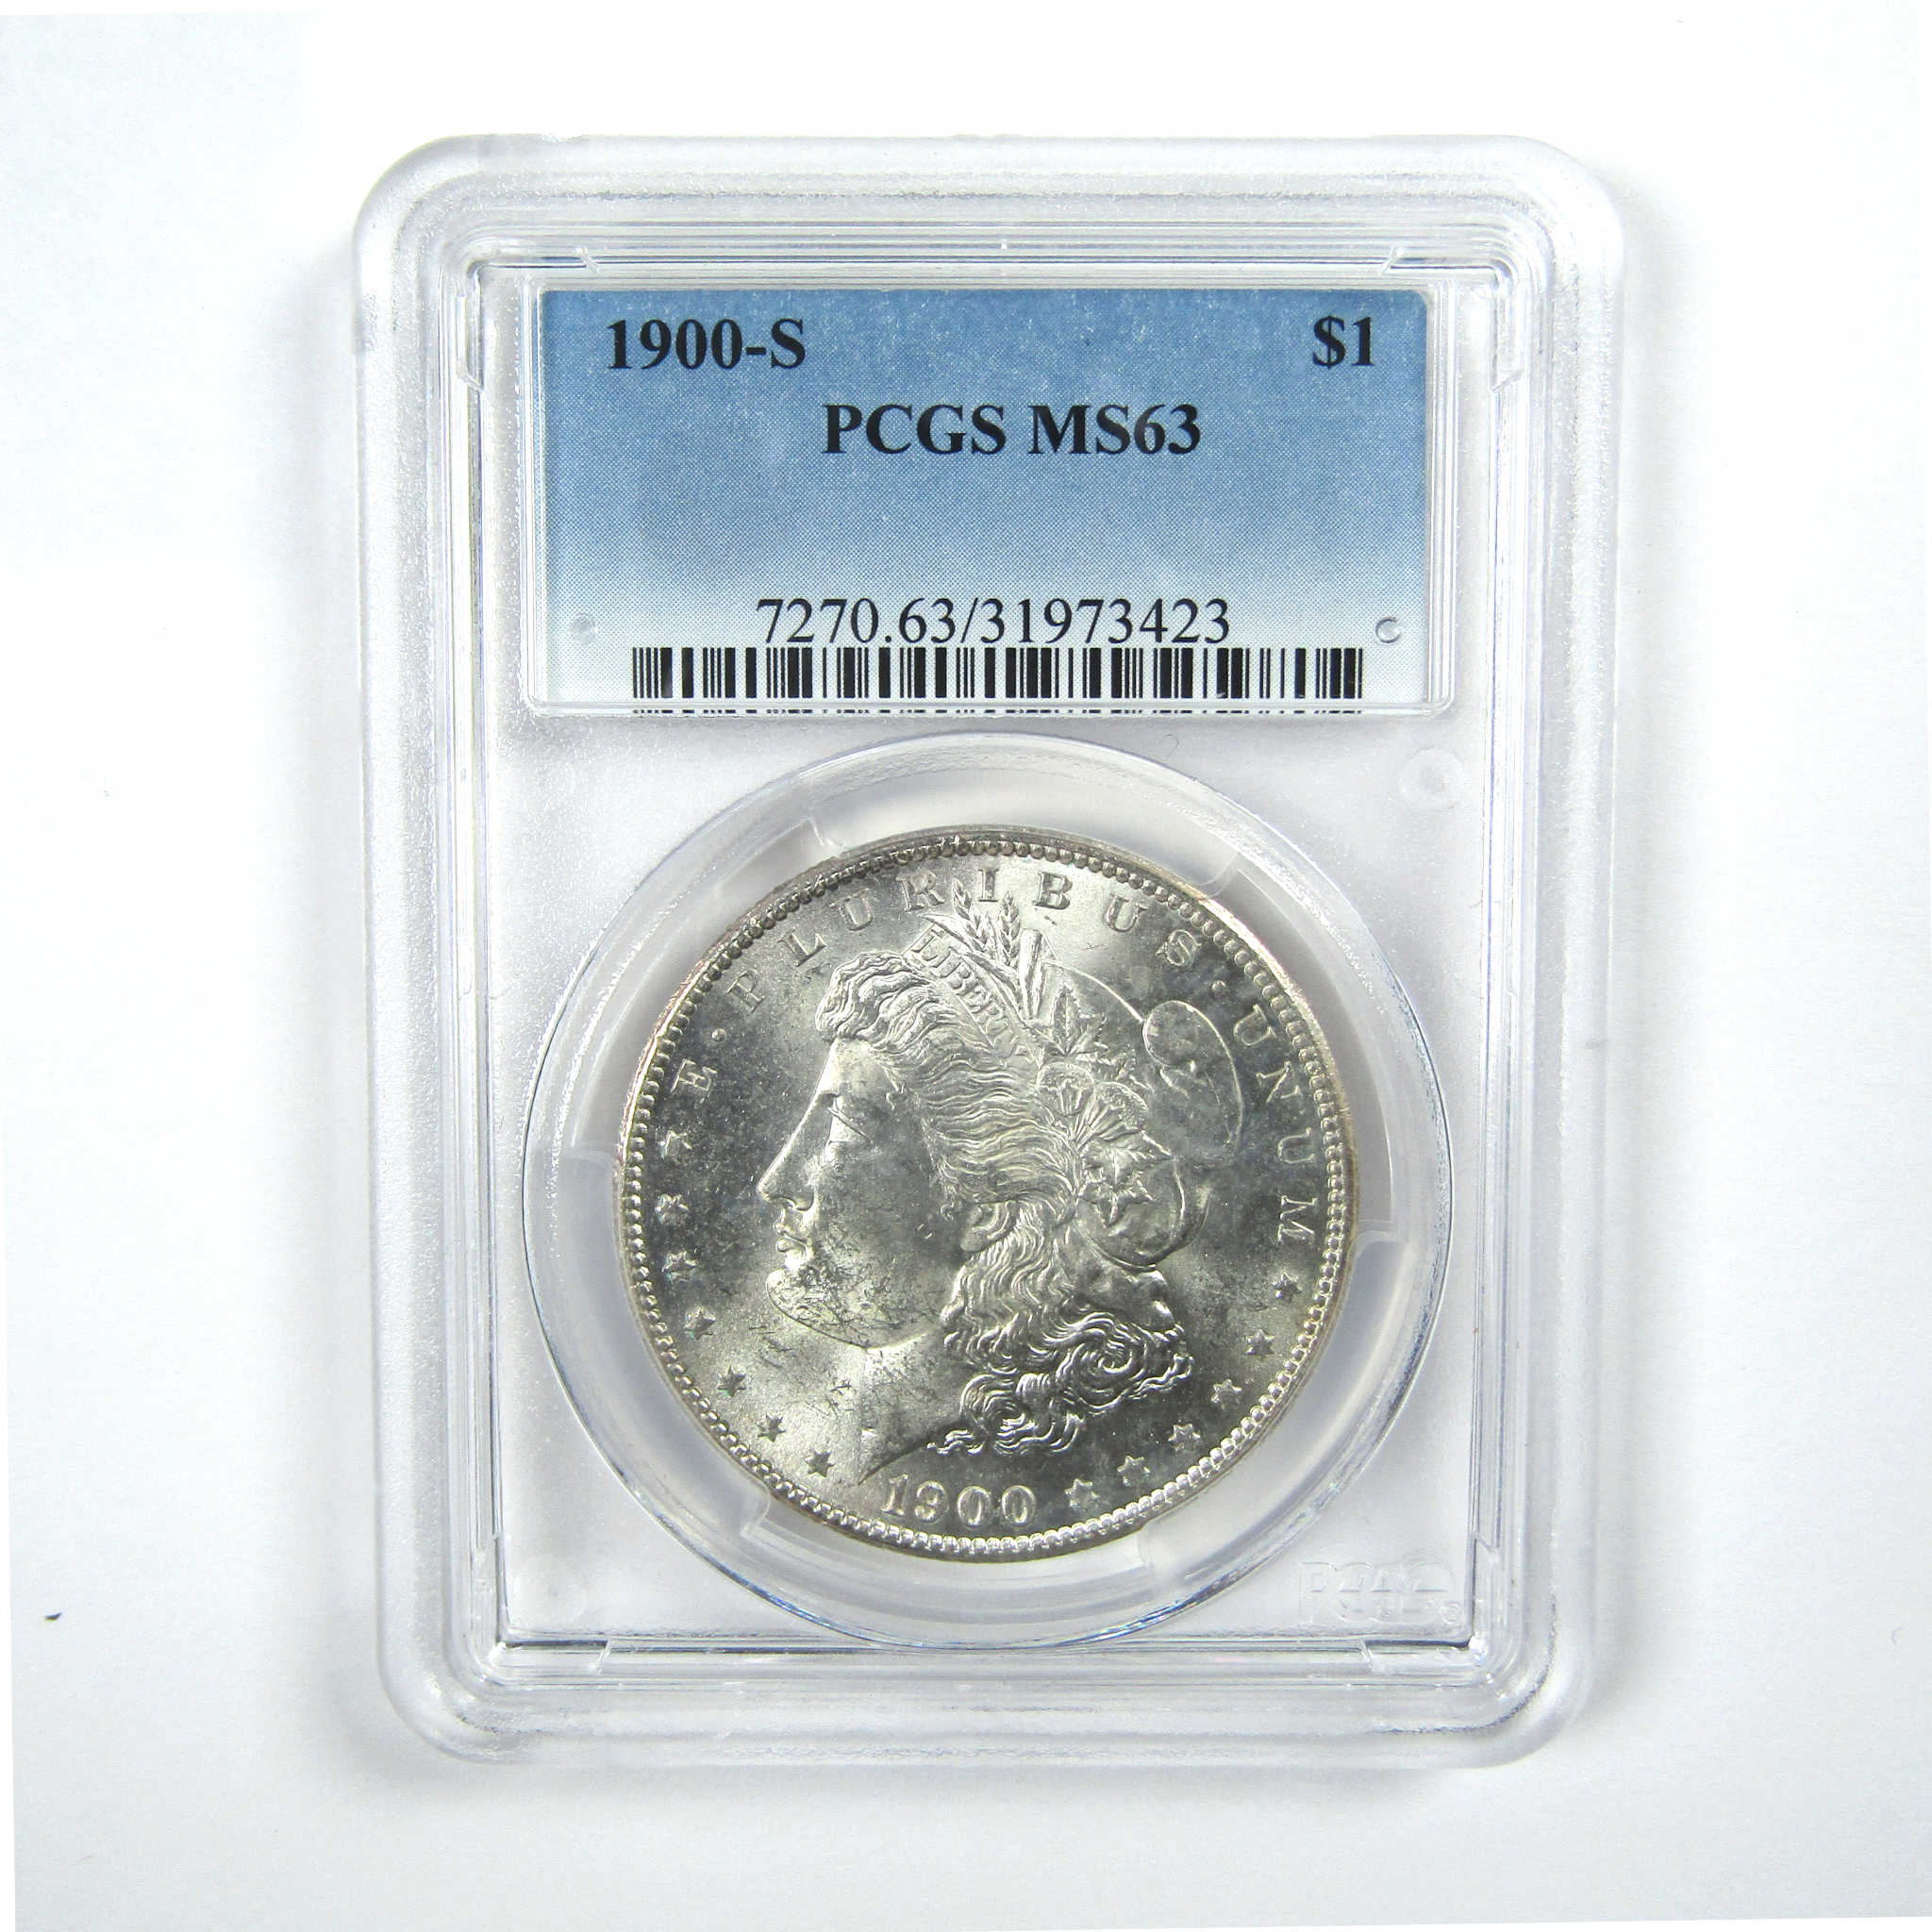 1900 S Morgan Dollar MS 63 PCGS Silver $1 Uncirculated Coin SKU:I13796 - Morgan coin - Morgan silver dollar - Morgan silver dollar for sale - Profile Coins &amp; Collectibles